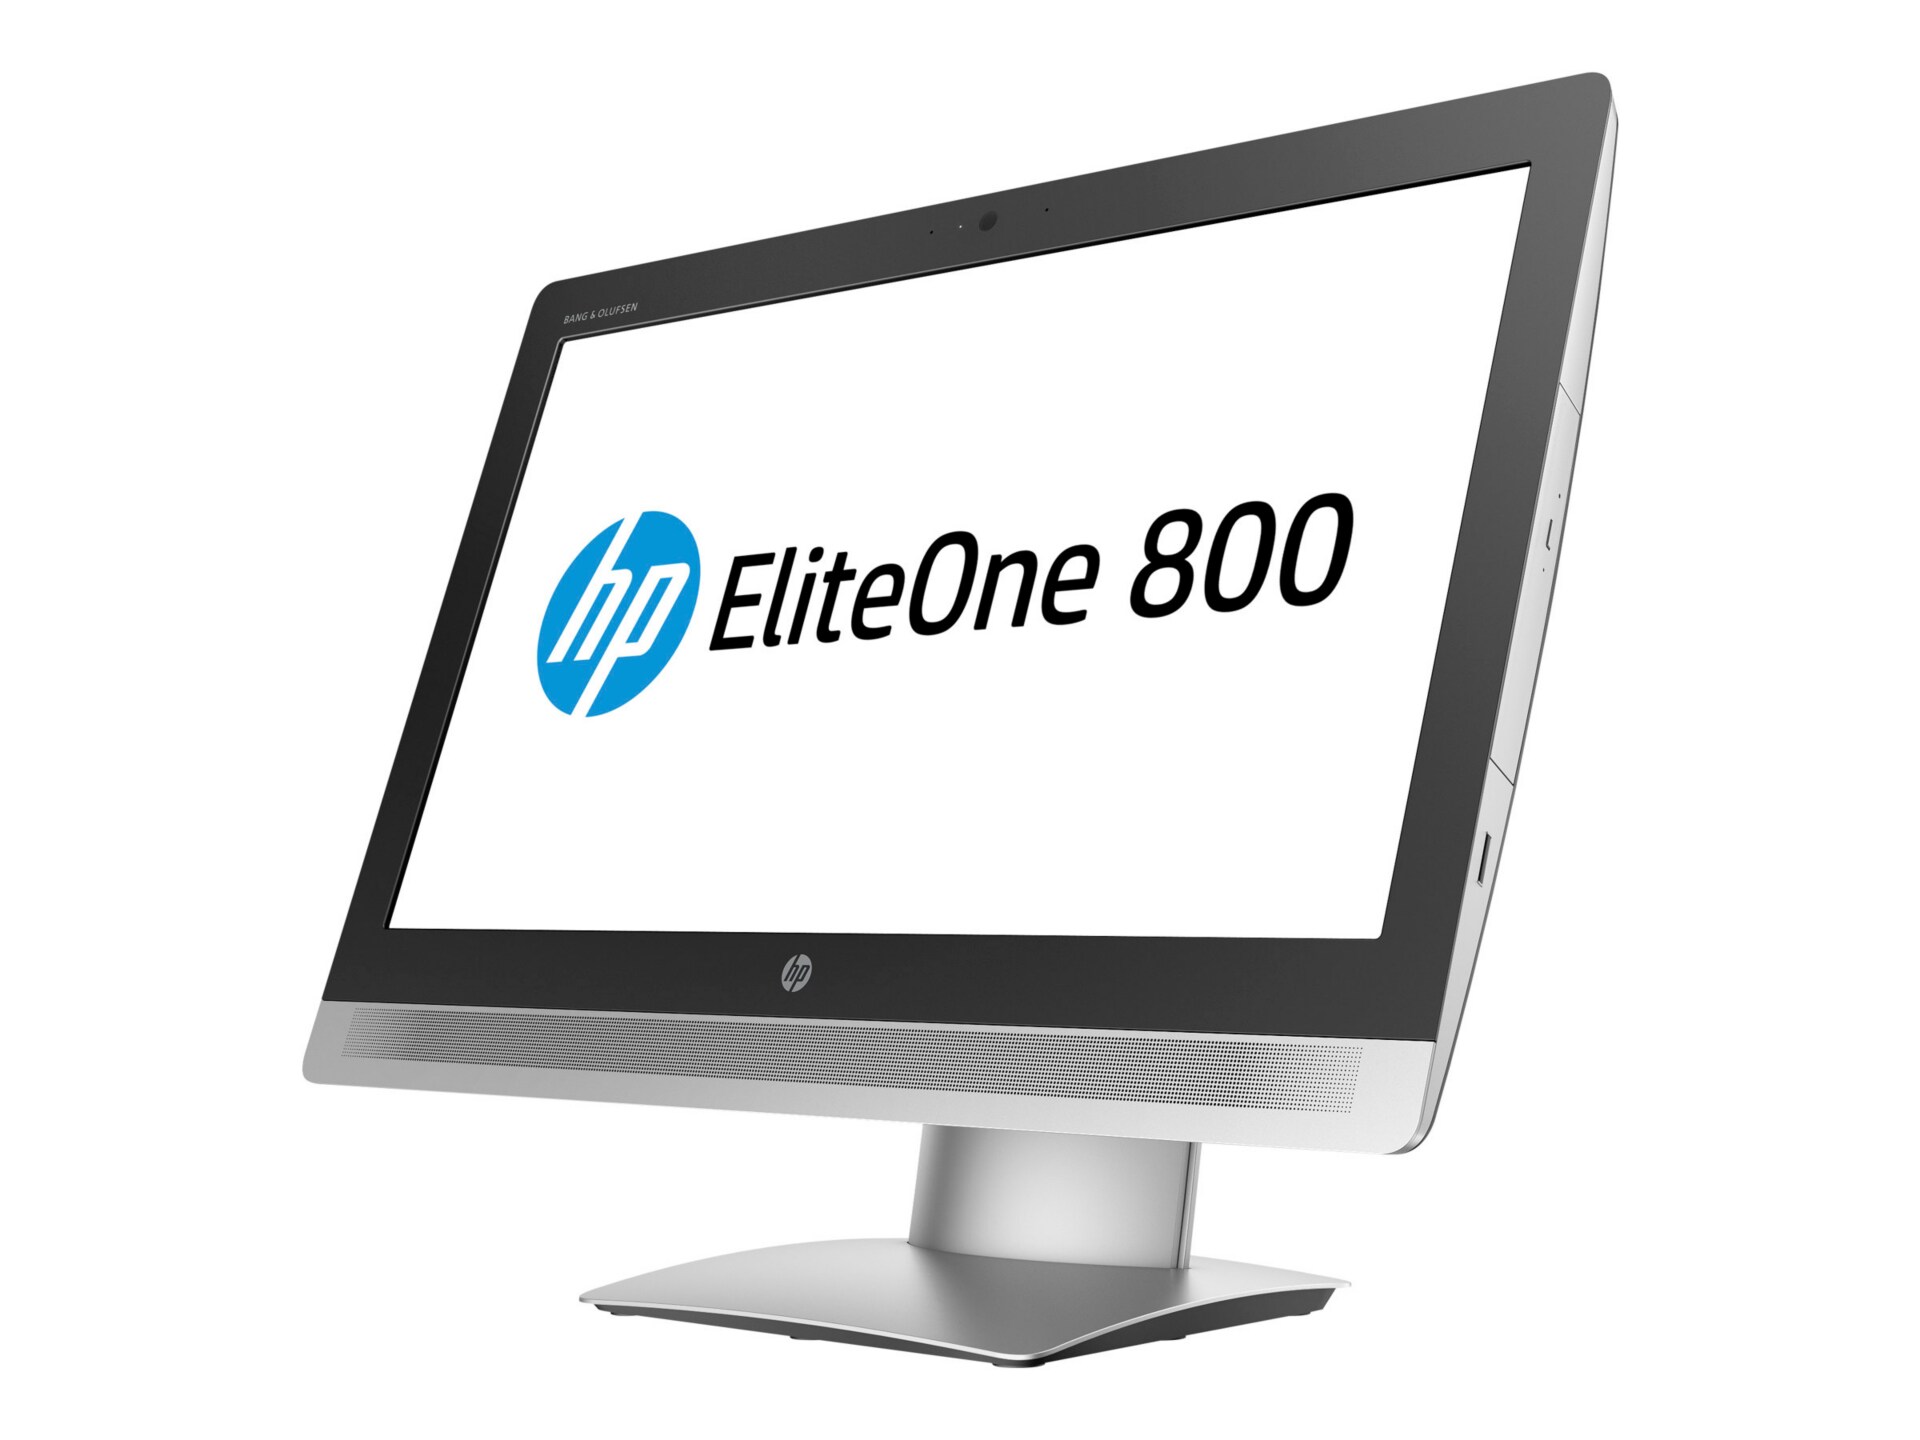 HP EliteOne 800 G2 - all-in-one - Core i7 6700 3.4 GHz - 8 GB - 1 TB - LED 23" - US